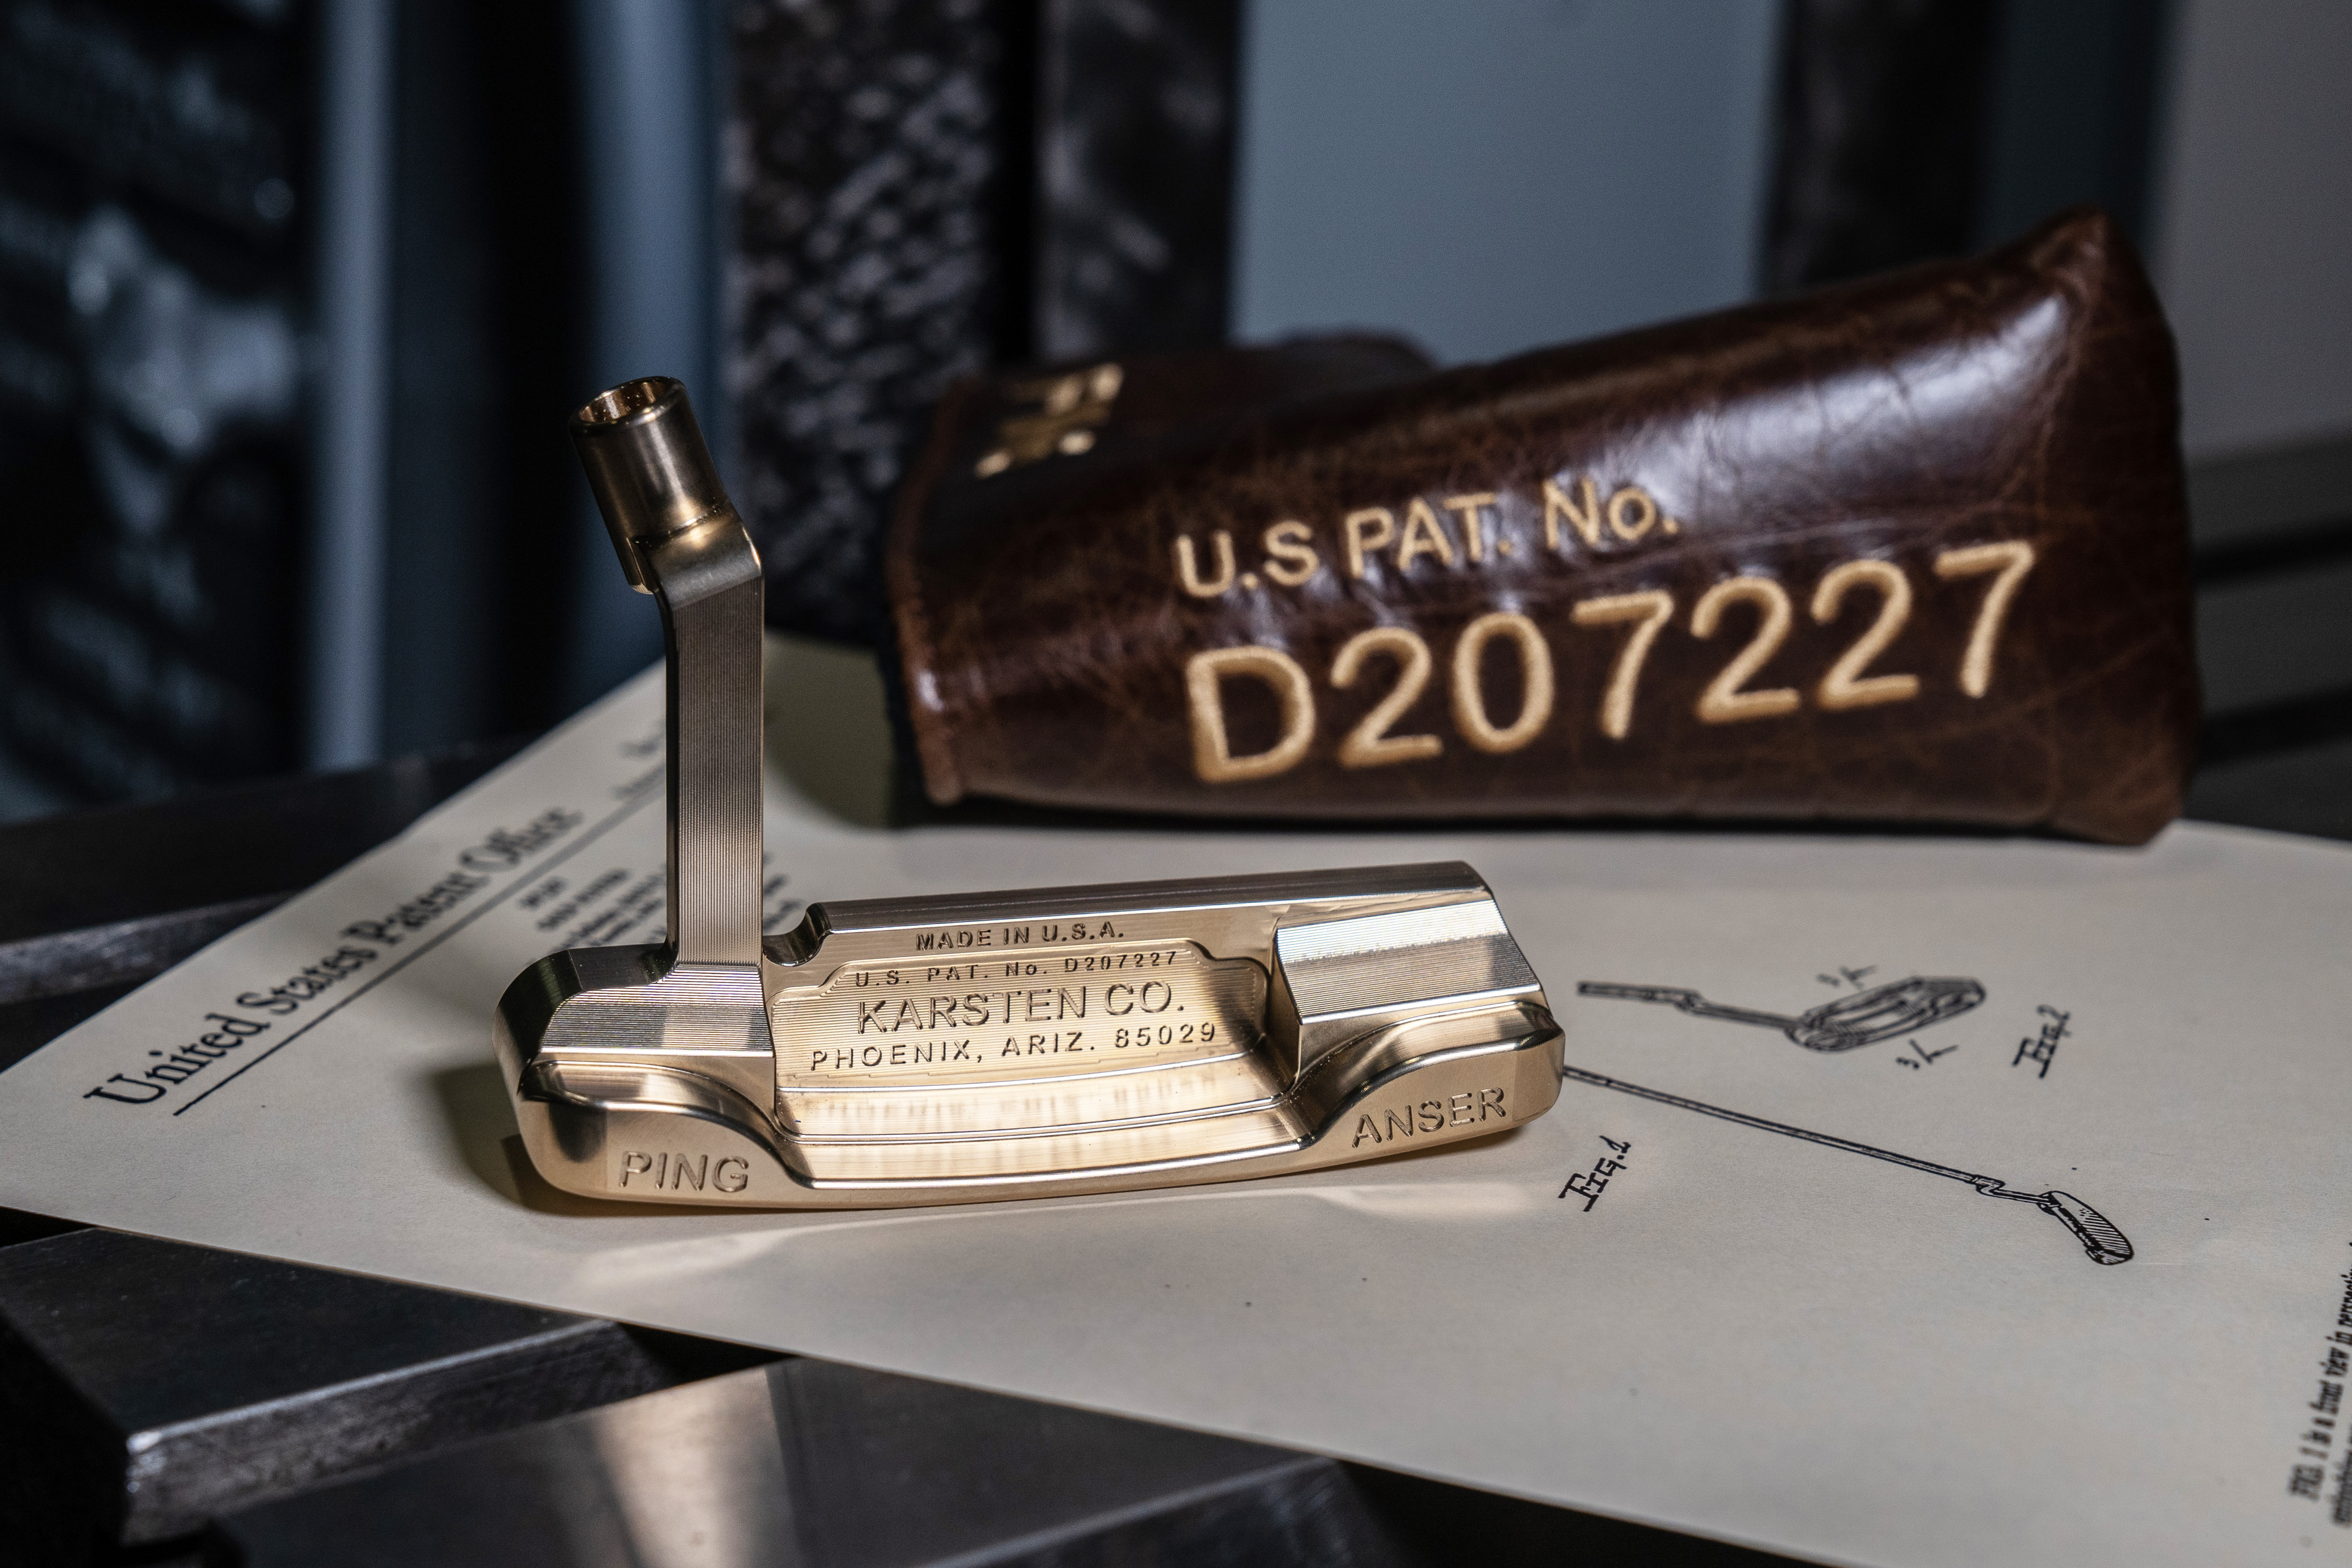 Ping releases Anser Patent 55 commemorative putters based on